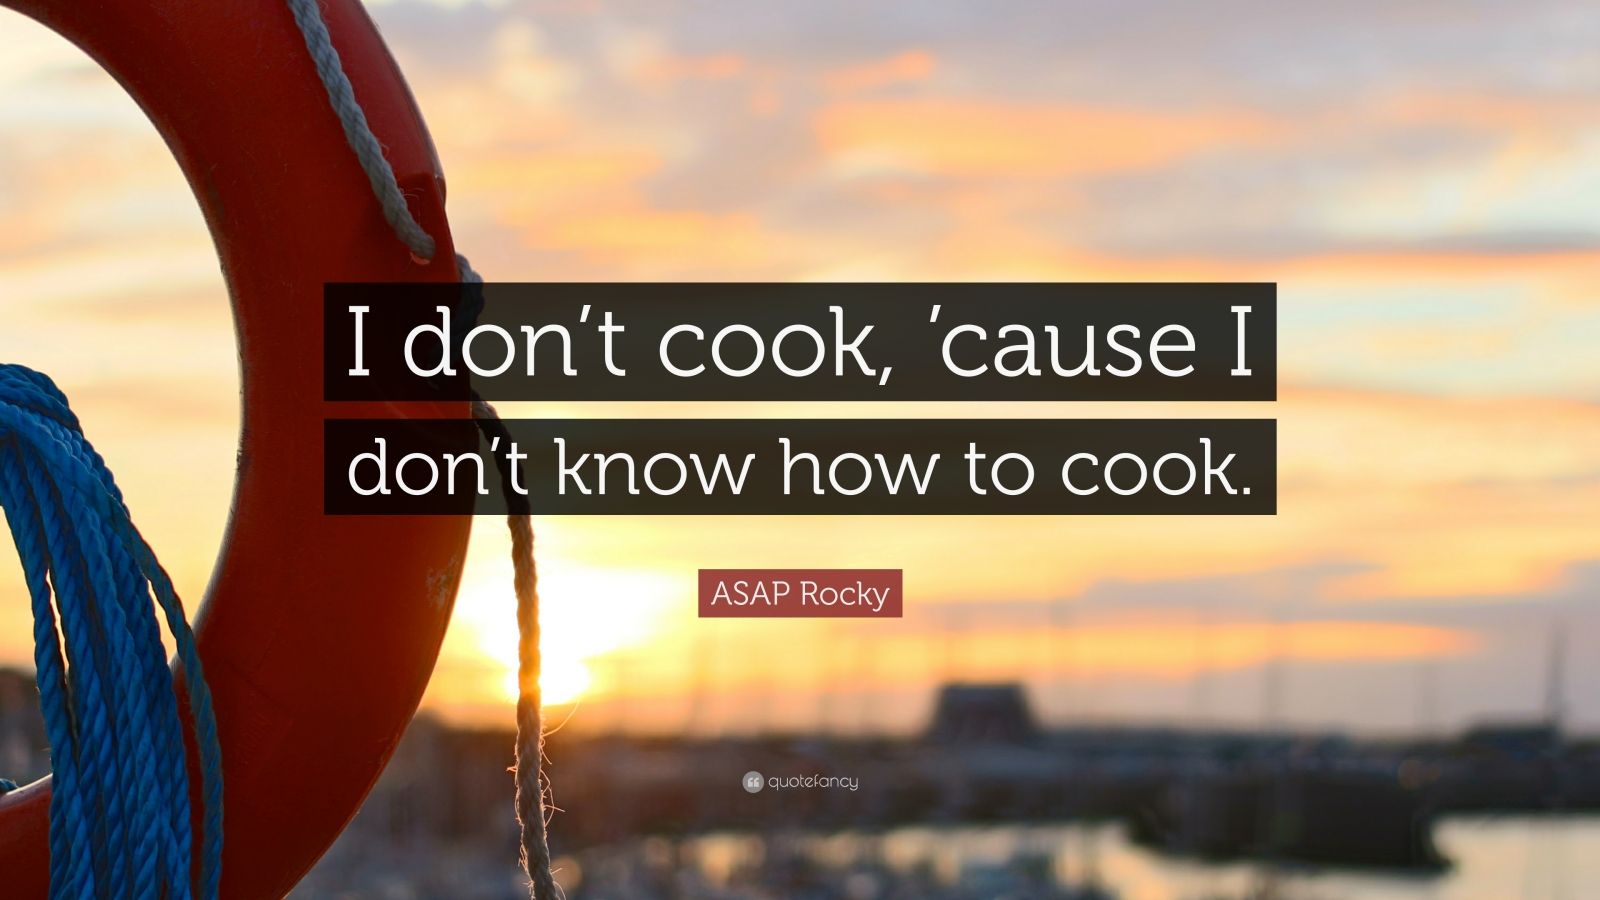 ASAP Rocky Quote: "I don't cook, 'cause I don't know how to cook." (7 wallpapers) - Quotefancy